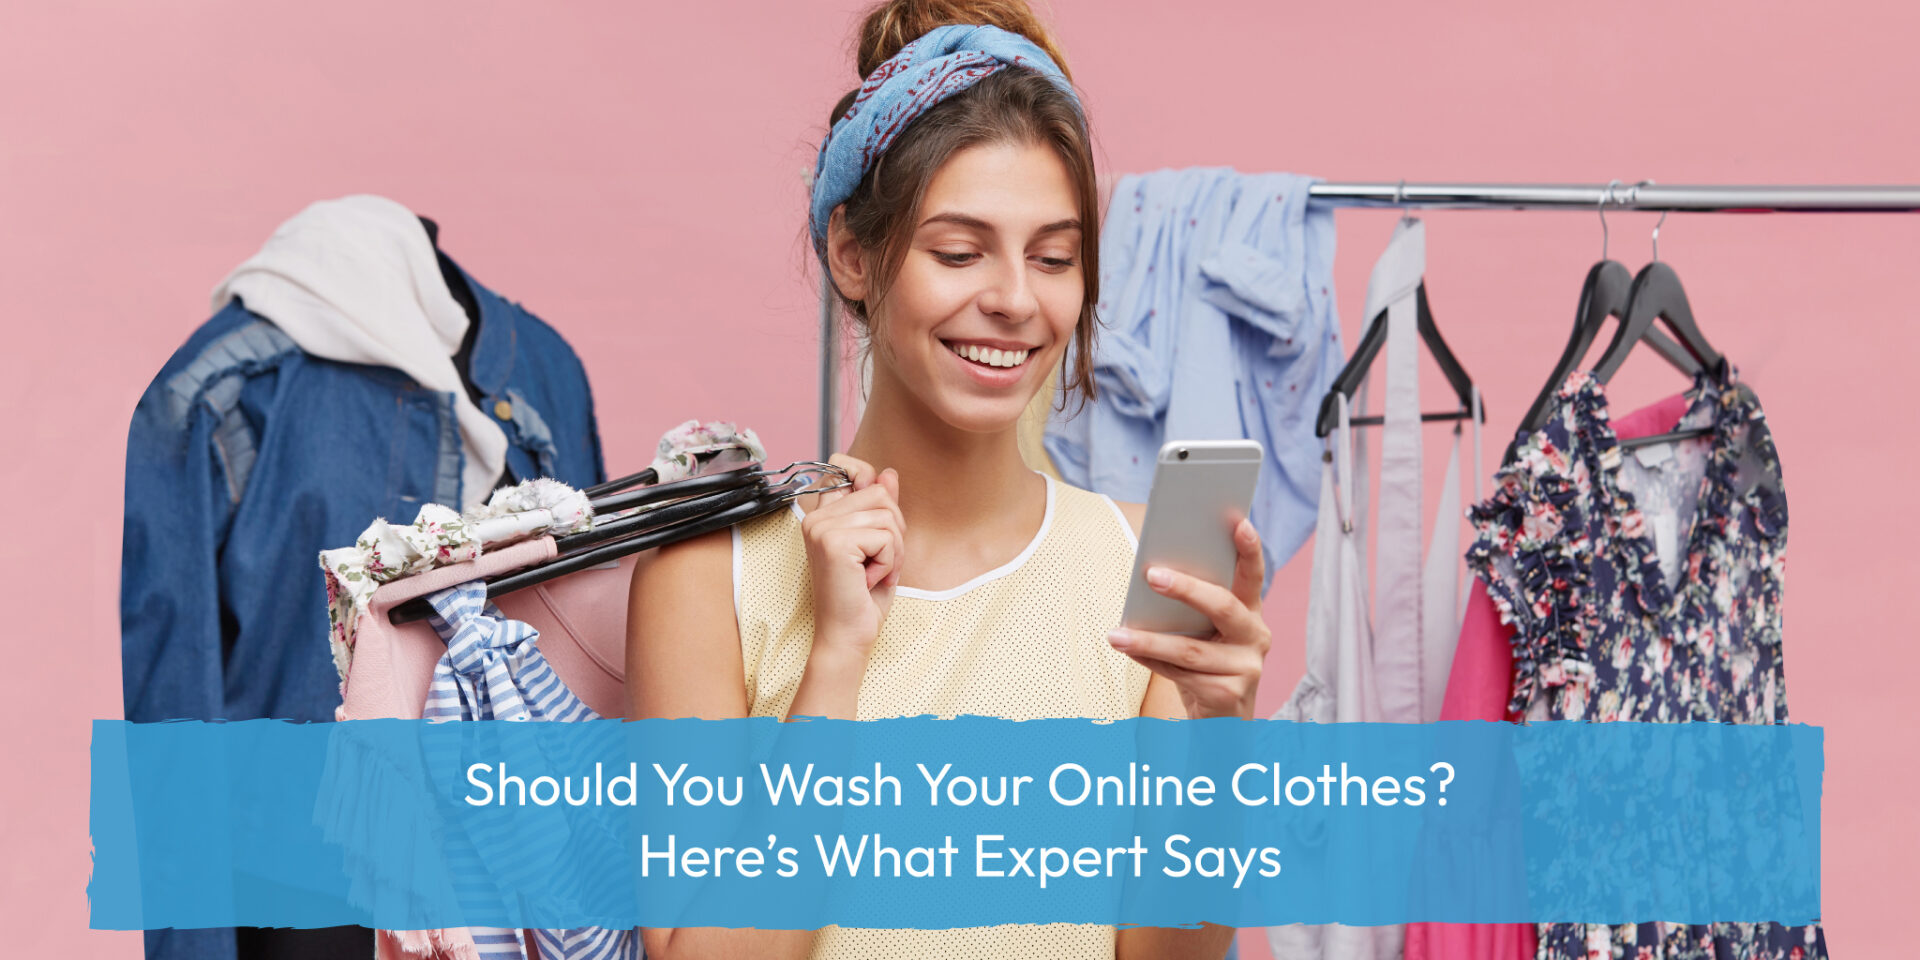 Should You Wash Your Online Clothes? Here’s What Expert Says